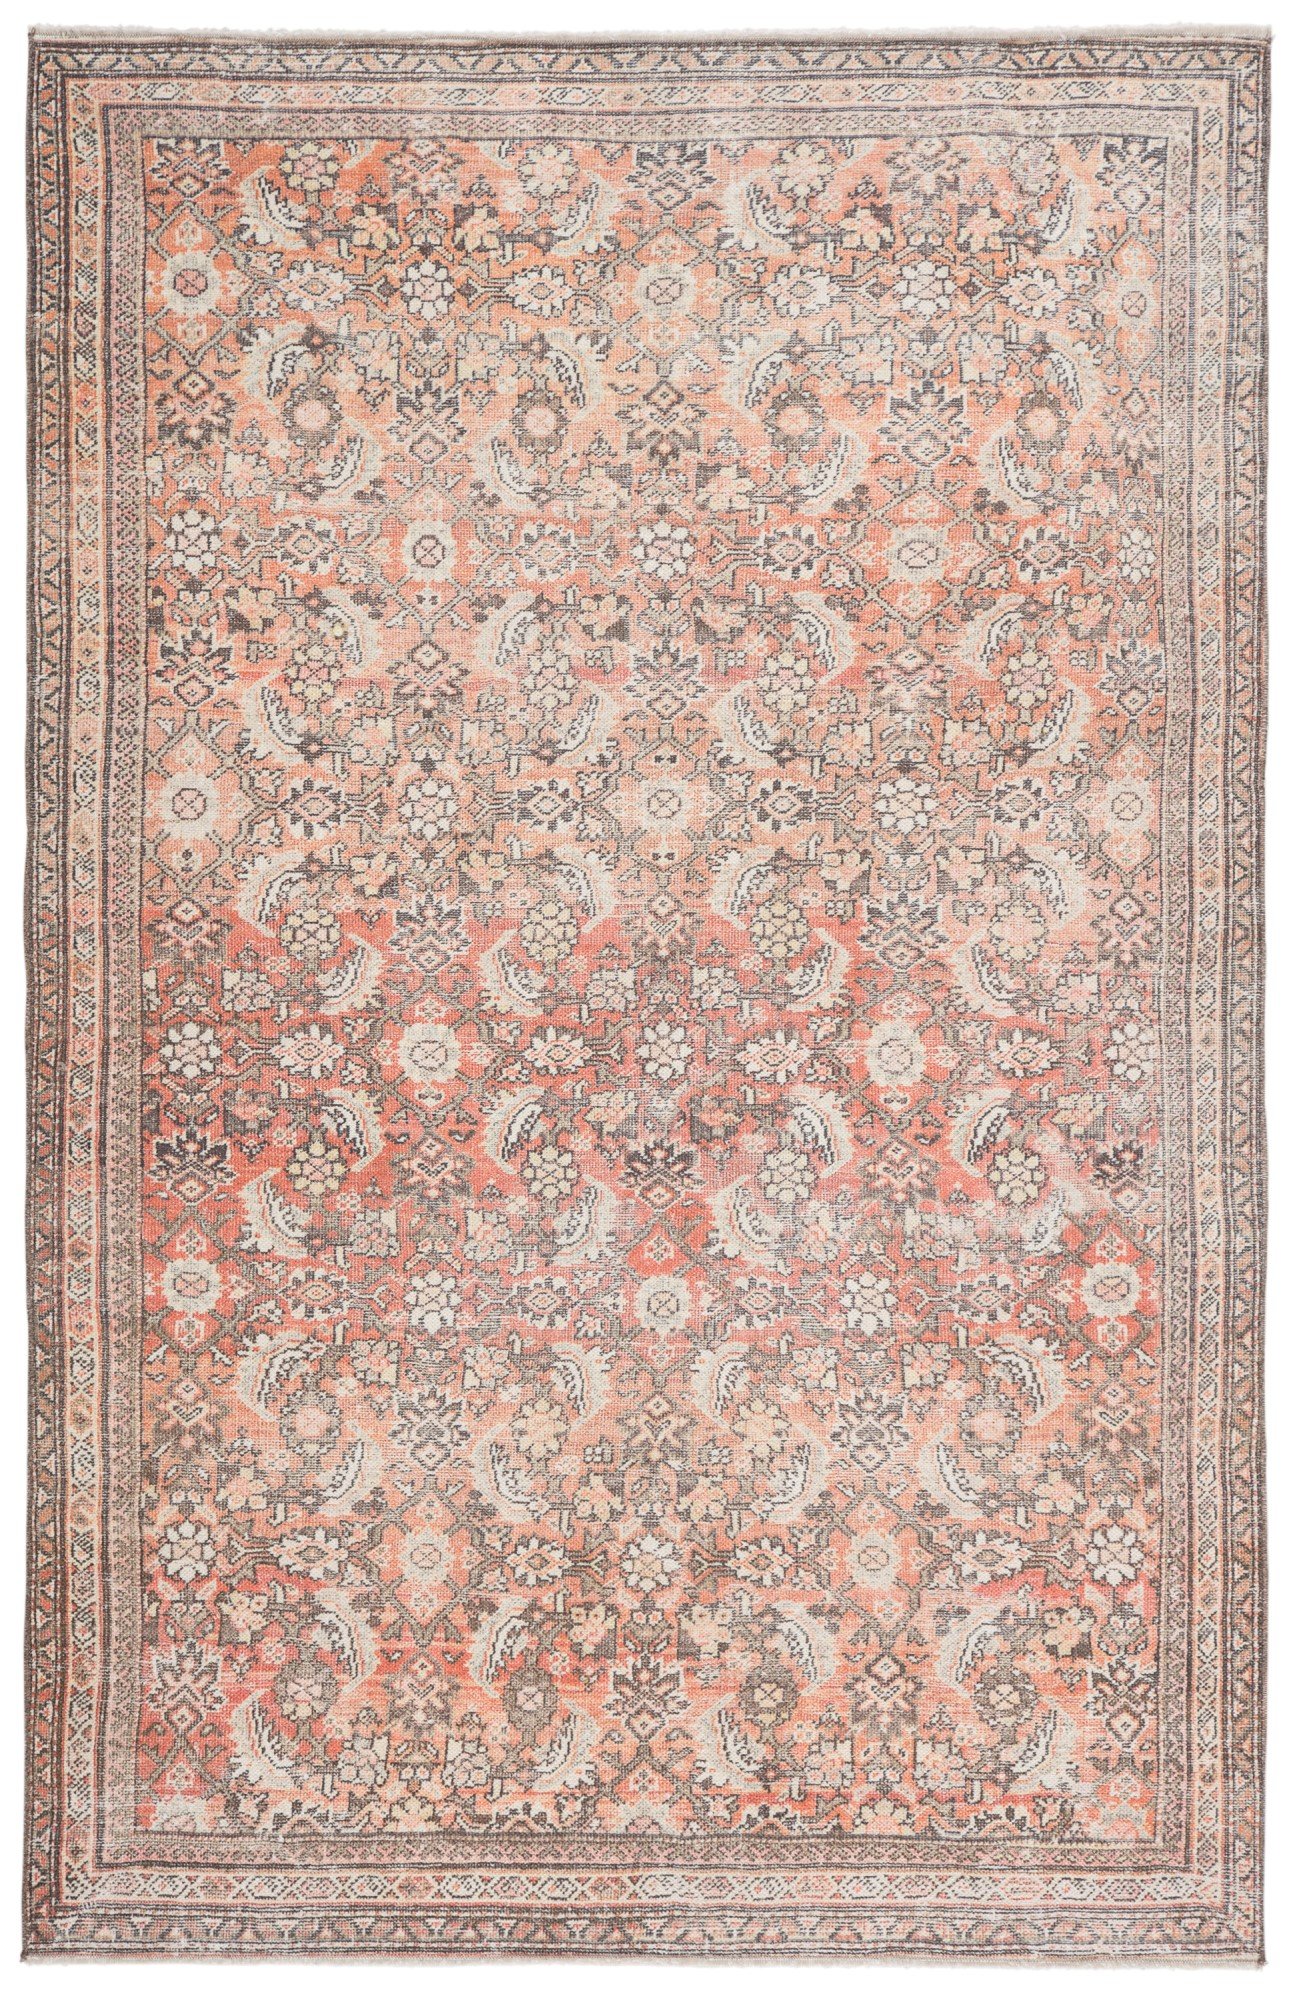 Orange Area Rugs To Match Your Style, 8×10 Pink Rug